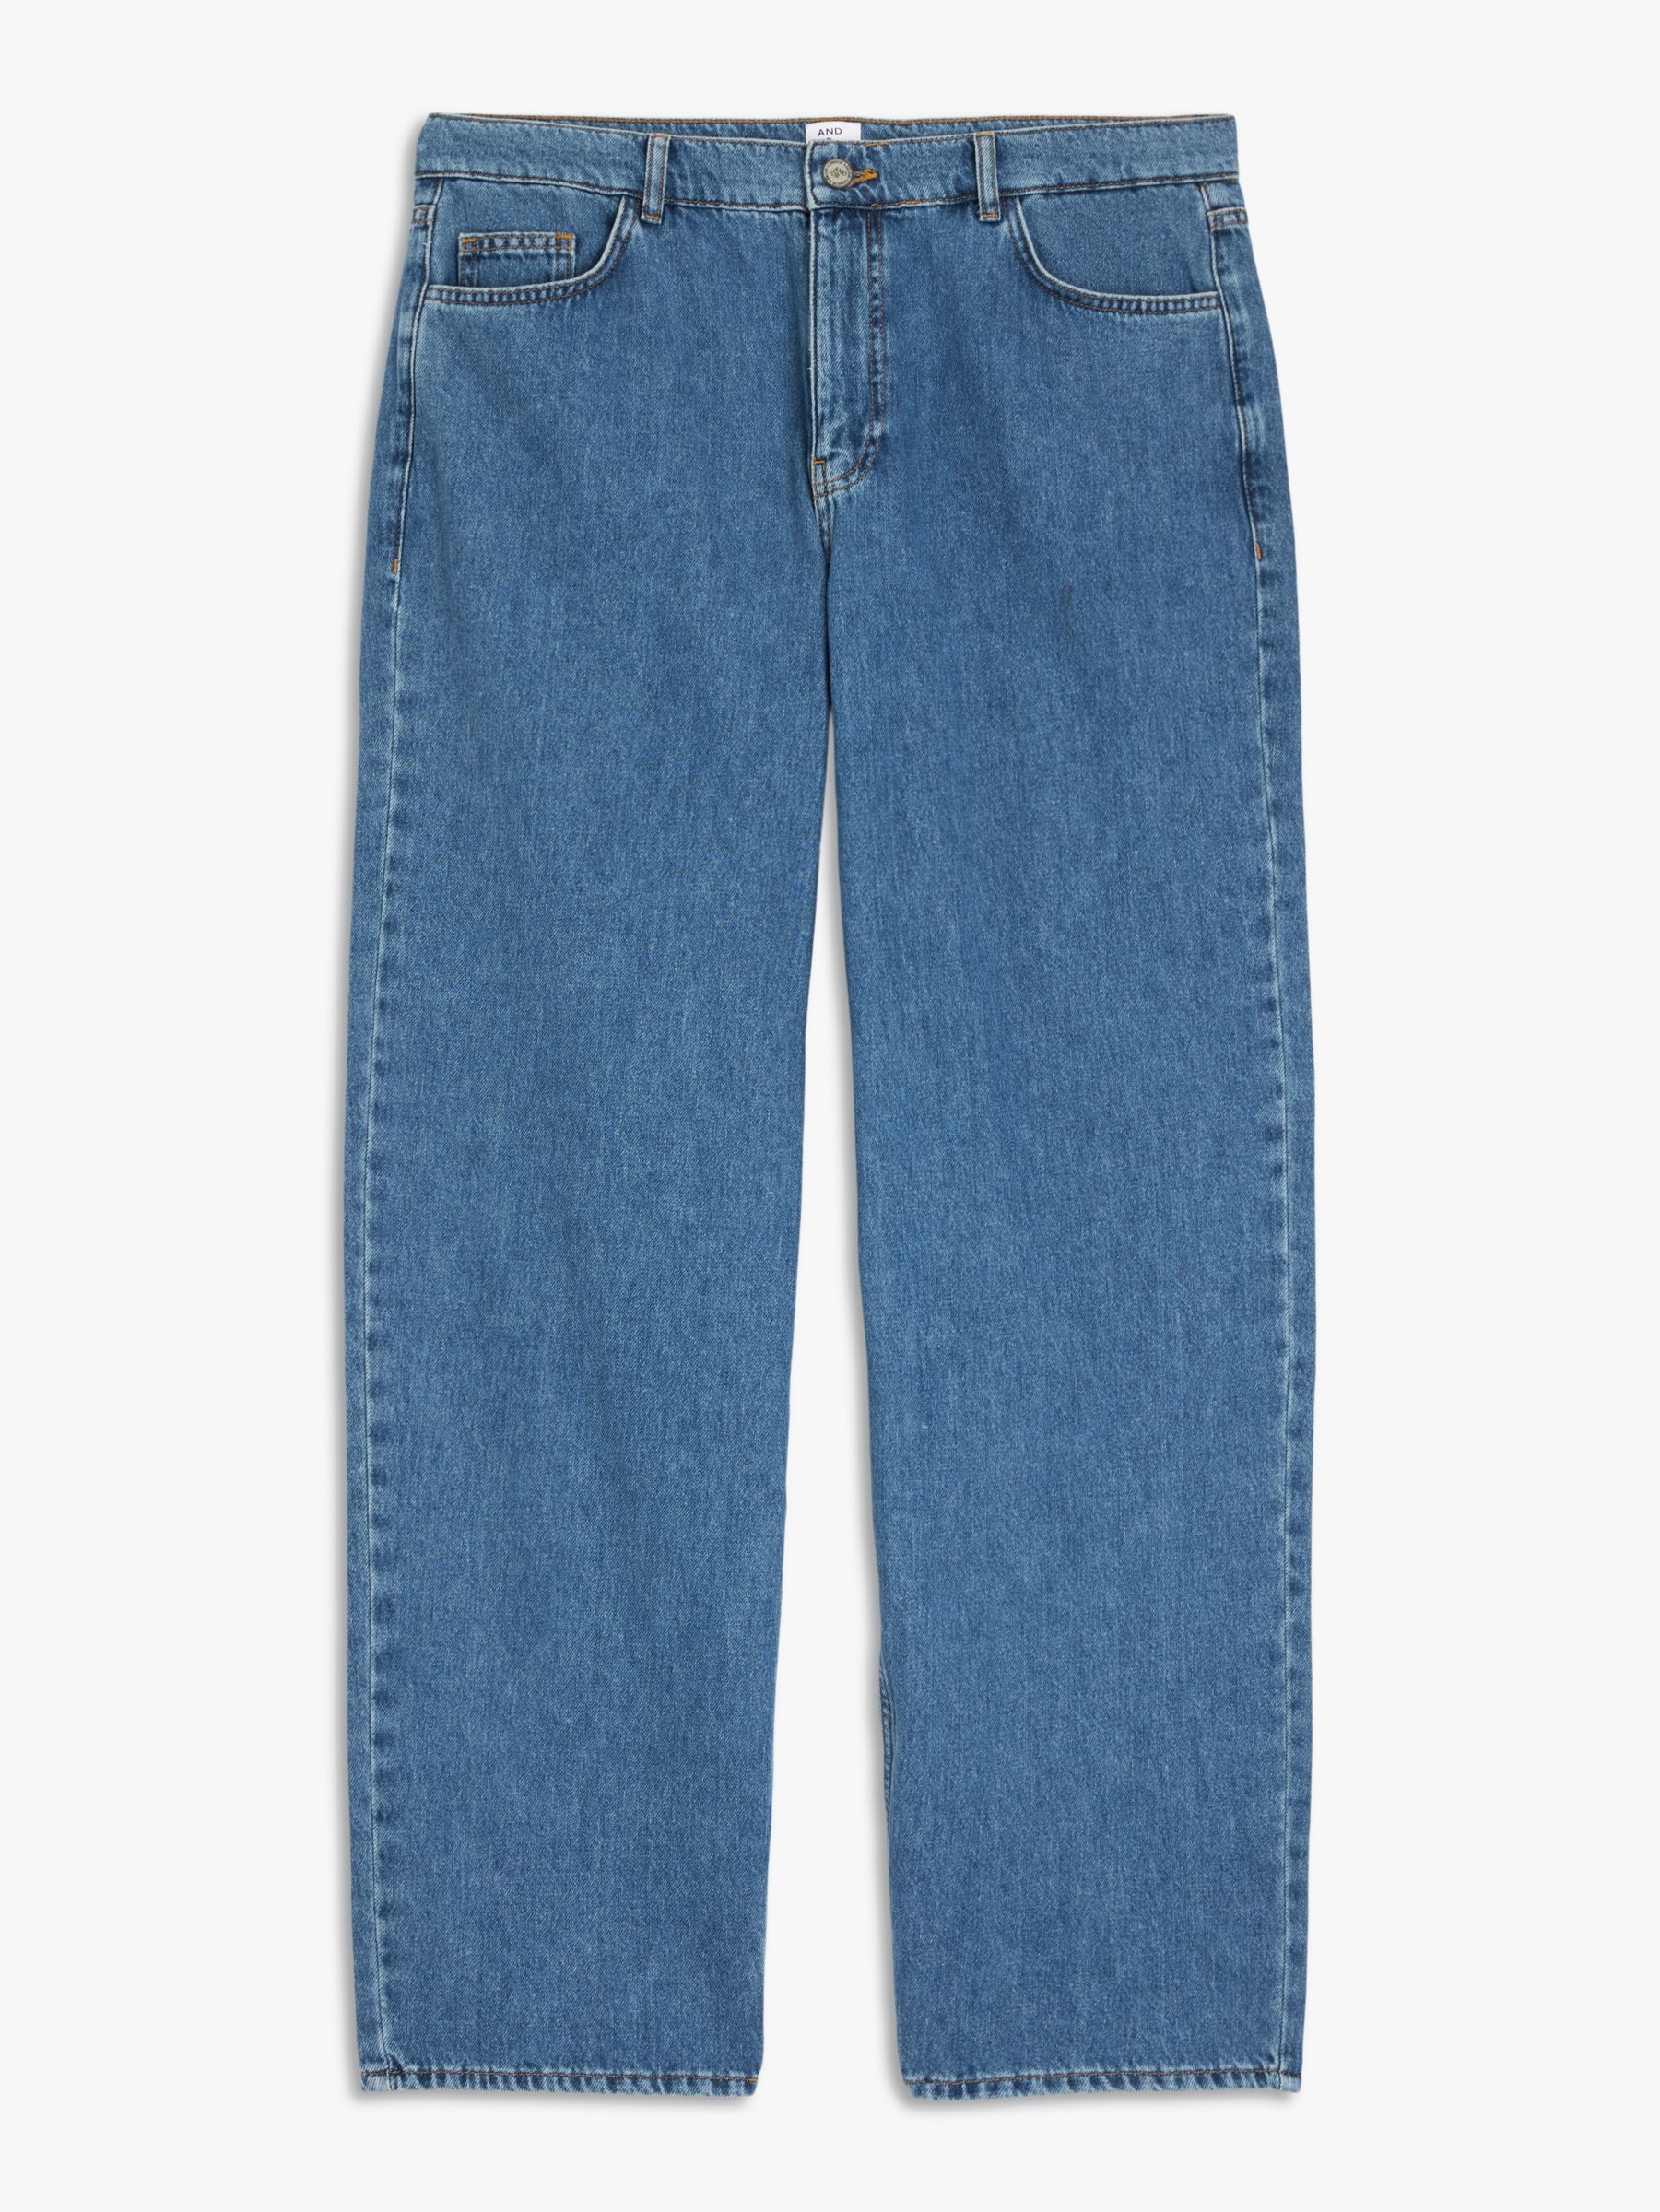 AND/OR Long Beach Baggy Jeans, Mid Blue Wash at John Lewis & Partners